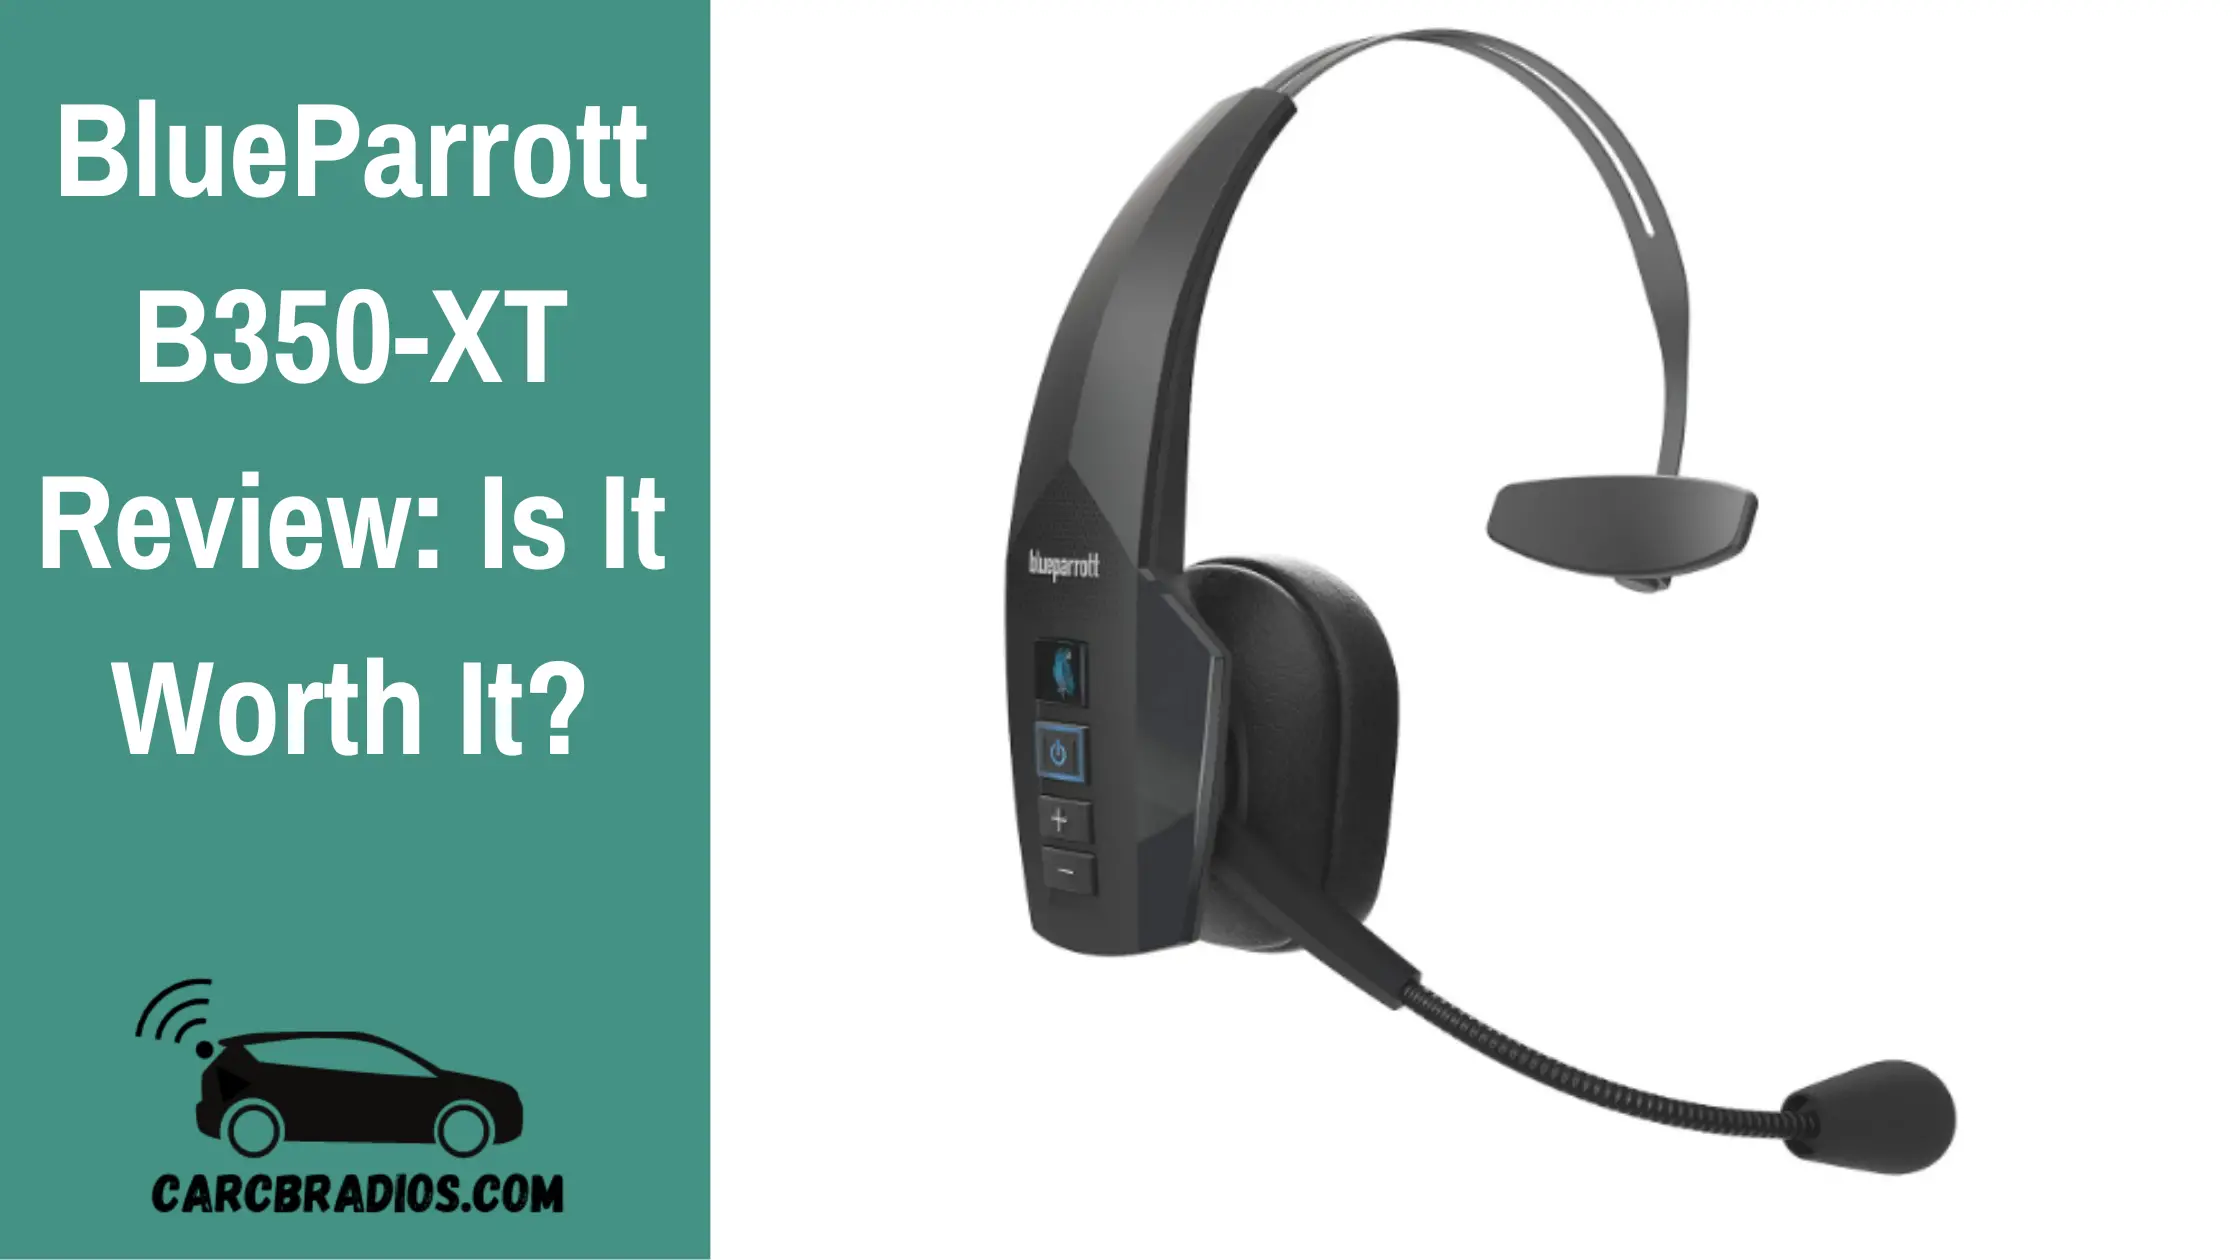 I recently had the opportunity to try out the BlueParrott B350-XT wireless noise-canceling Bluetooth headset, and I was impressed with its features. The headset has an industry-leading 96% noise cancellation, which allowed me to have clear conversations even in noisy environments.